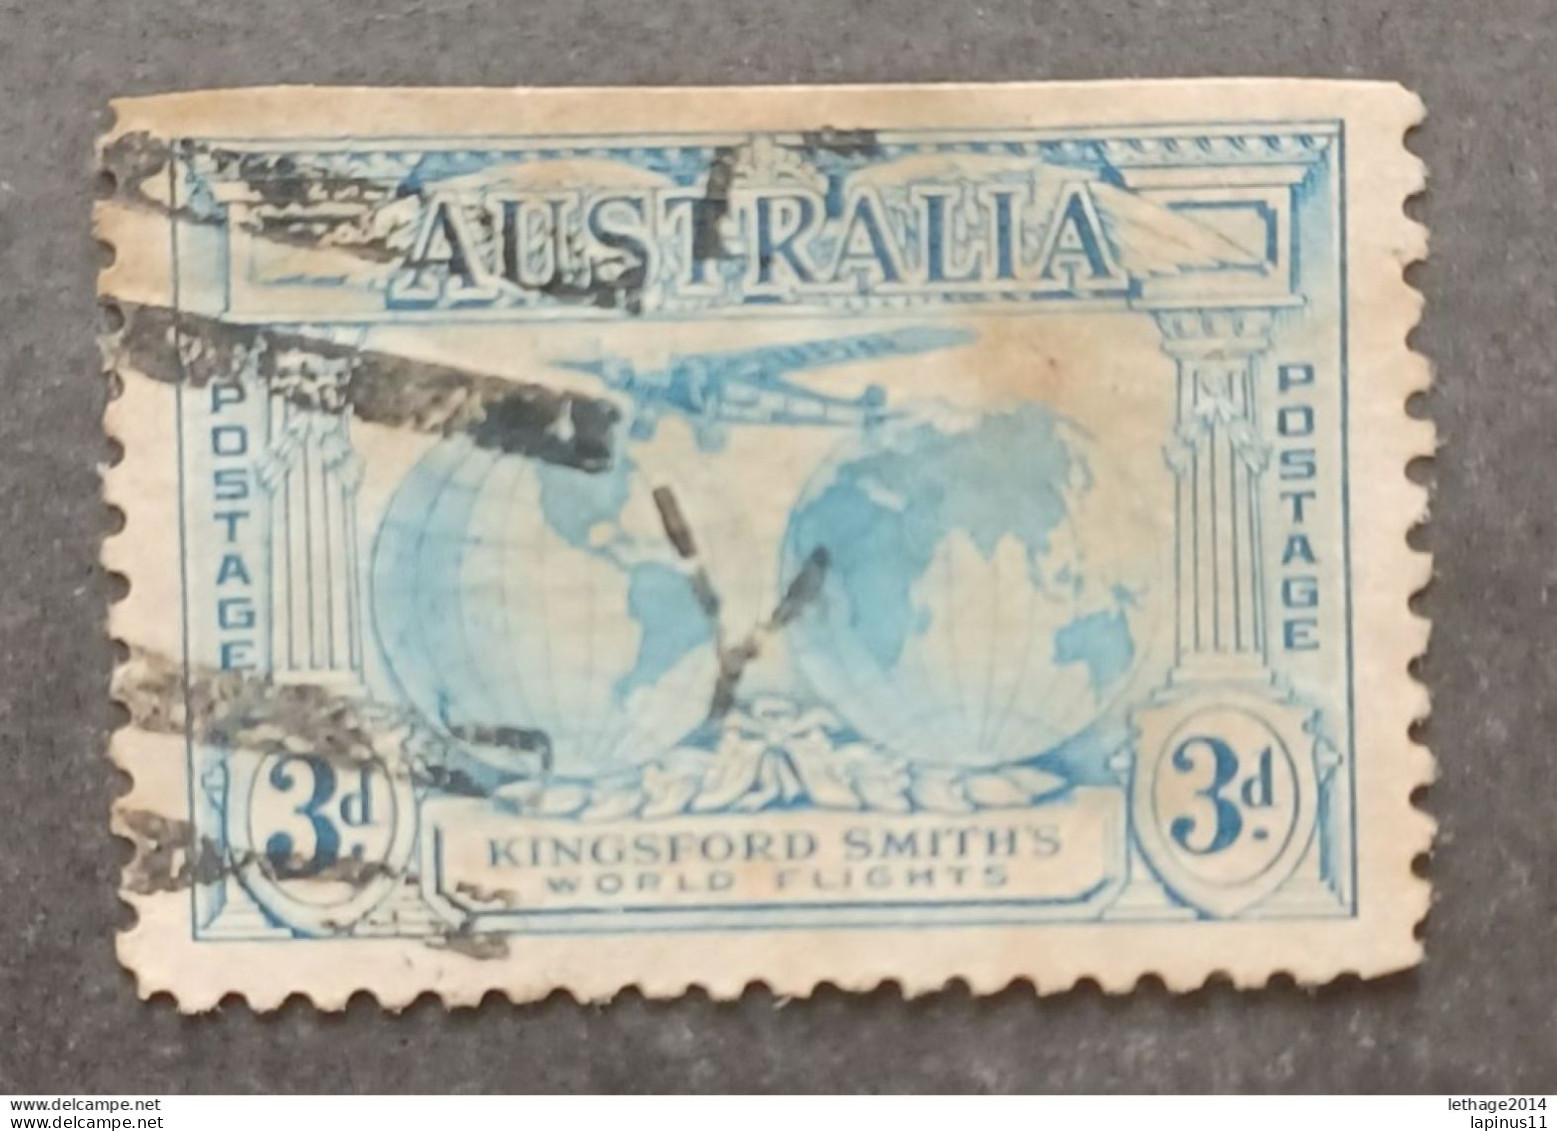 AUSTRALIA 1931 SOUTHERN CROSS OVER OF THE EMISPHERES SCOTT N 112 VARIETY SUPERIOR IMPERFORATE - Usati